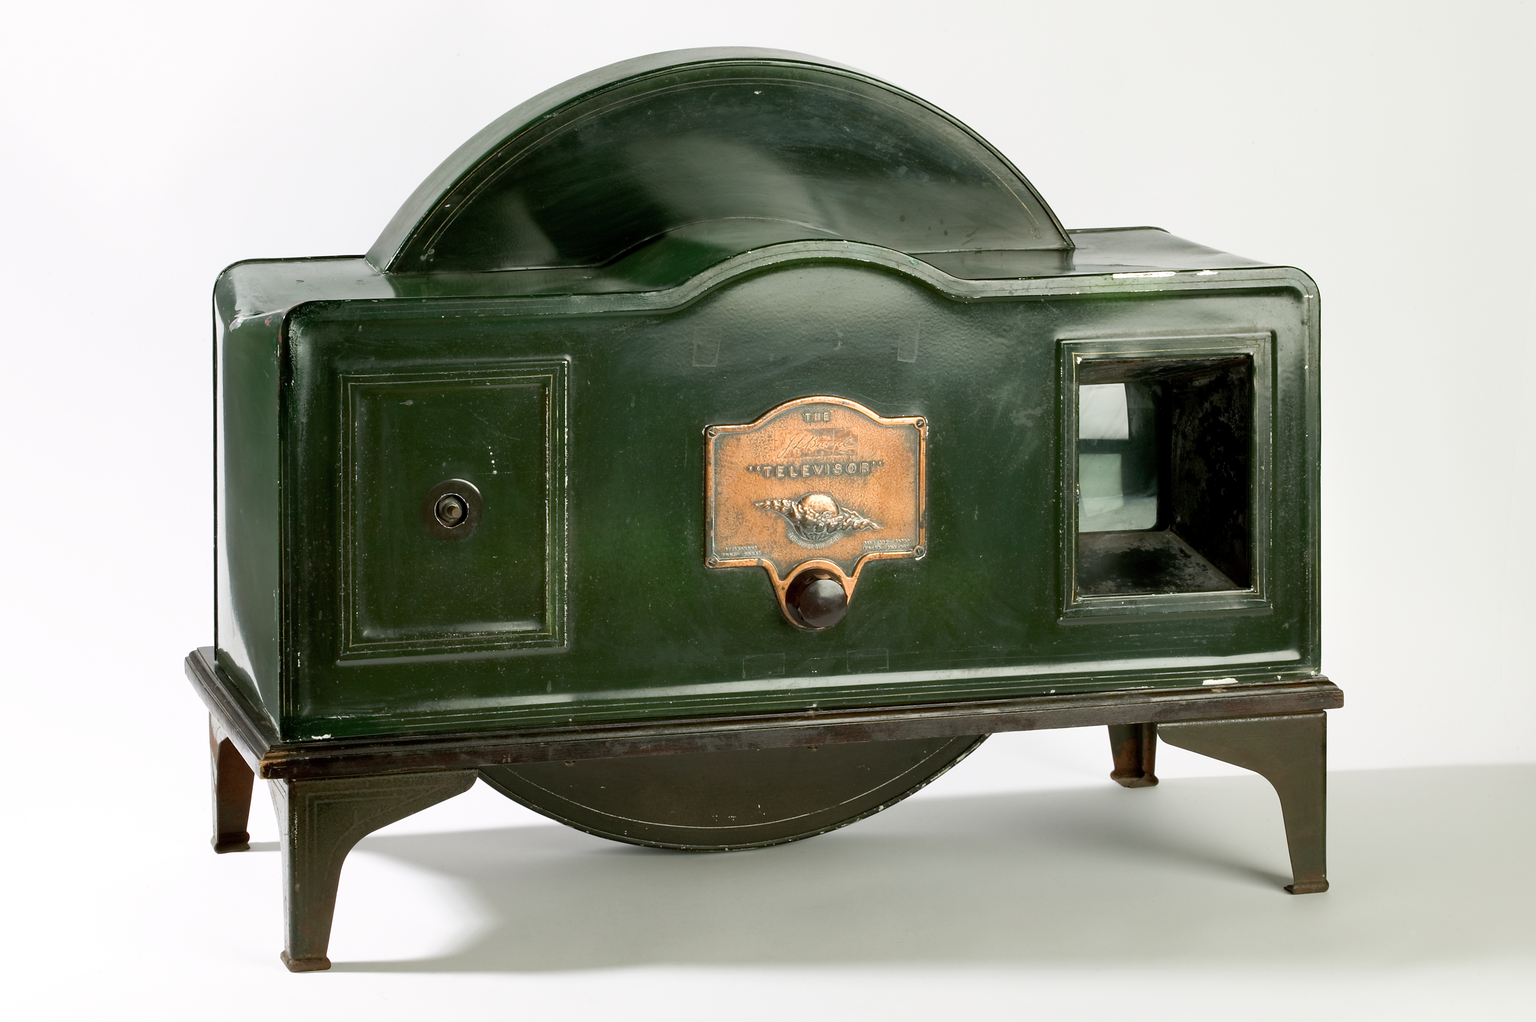 An early television set from the 1930s with a very small viewing screen 